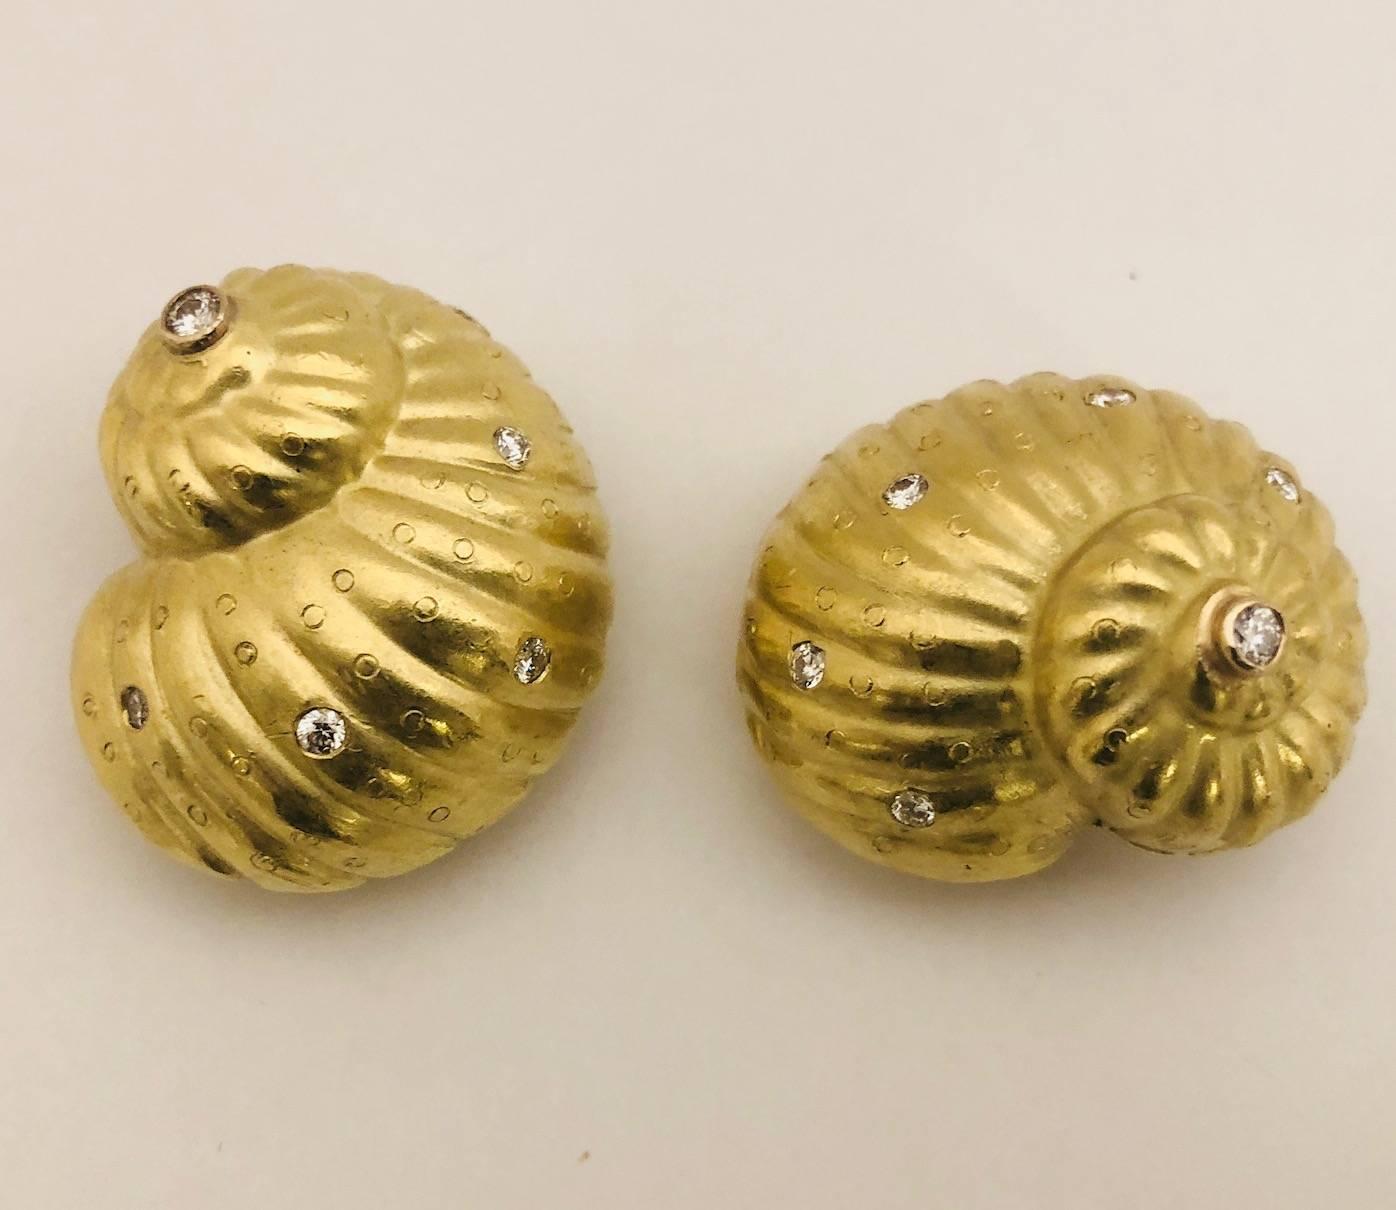 Fabricated in 18 karat yellow gold, these nautilus shells have a matte finish and the detail is striking!  Julia Boss creates the finest of fine jewelry with high end materials and timeless design.  Her pieces can be found at Neiman Marcus and The